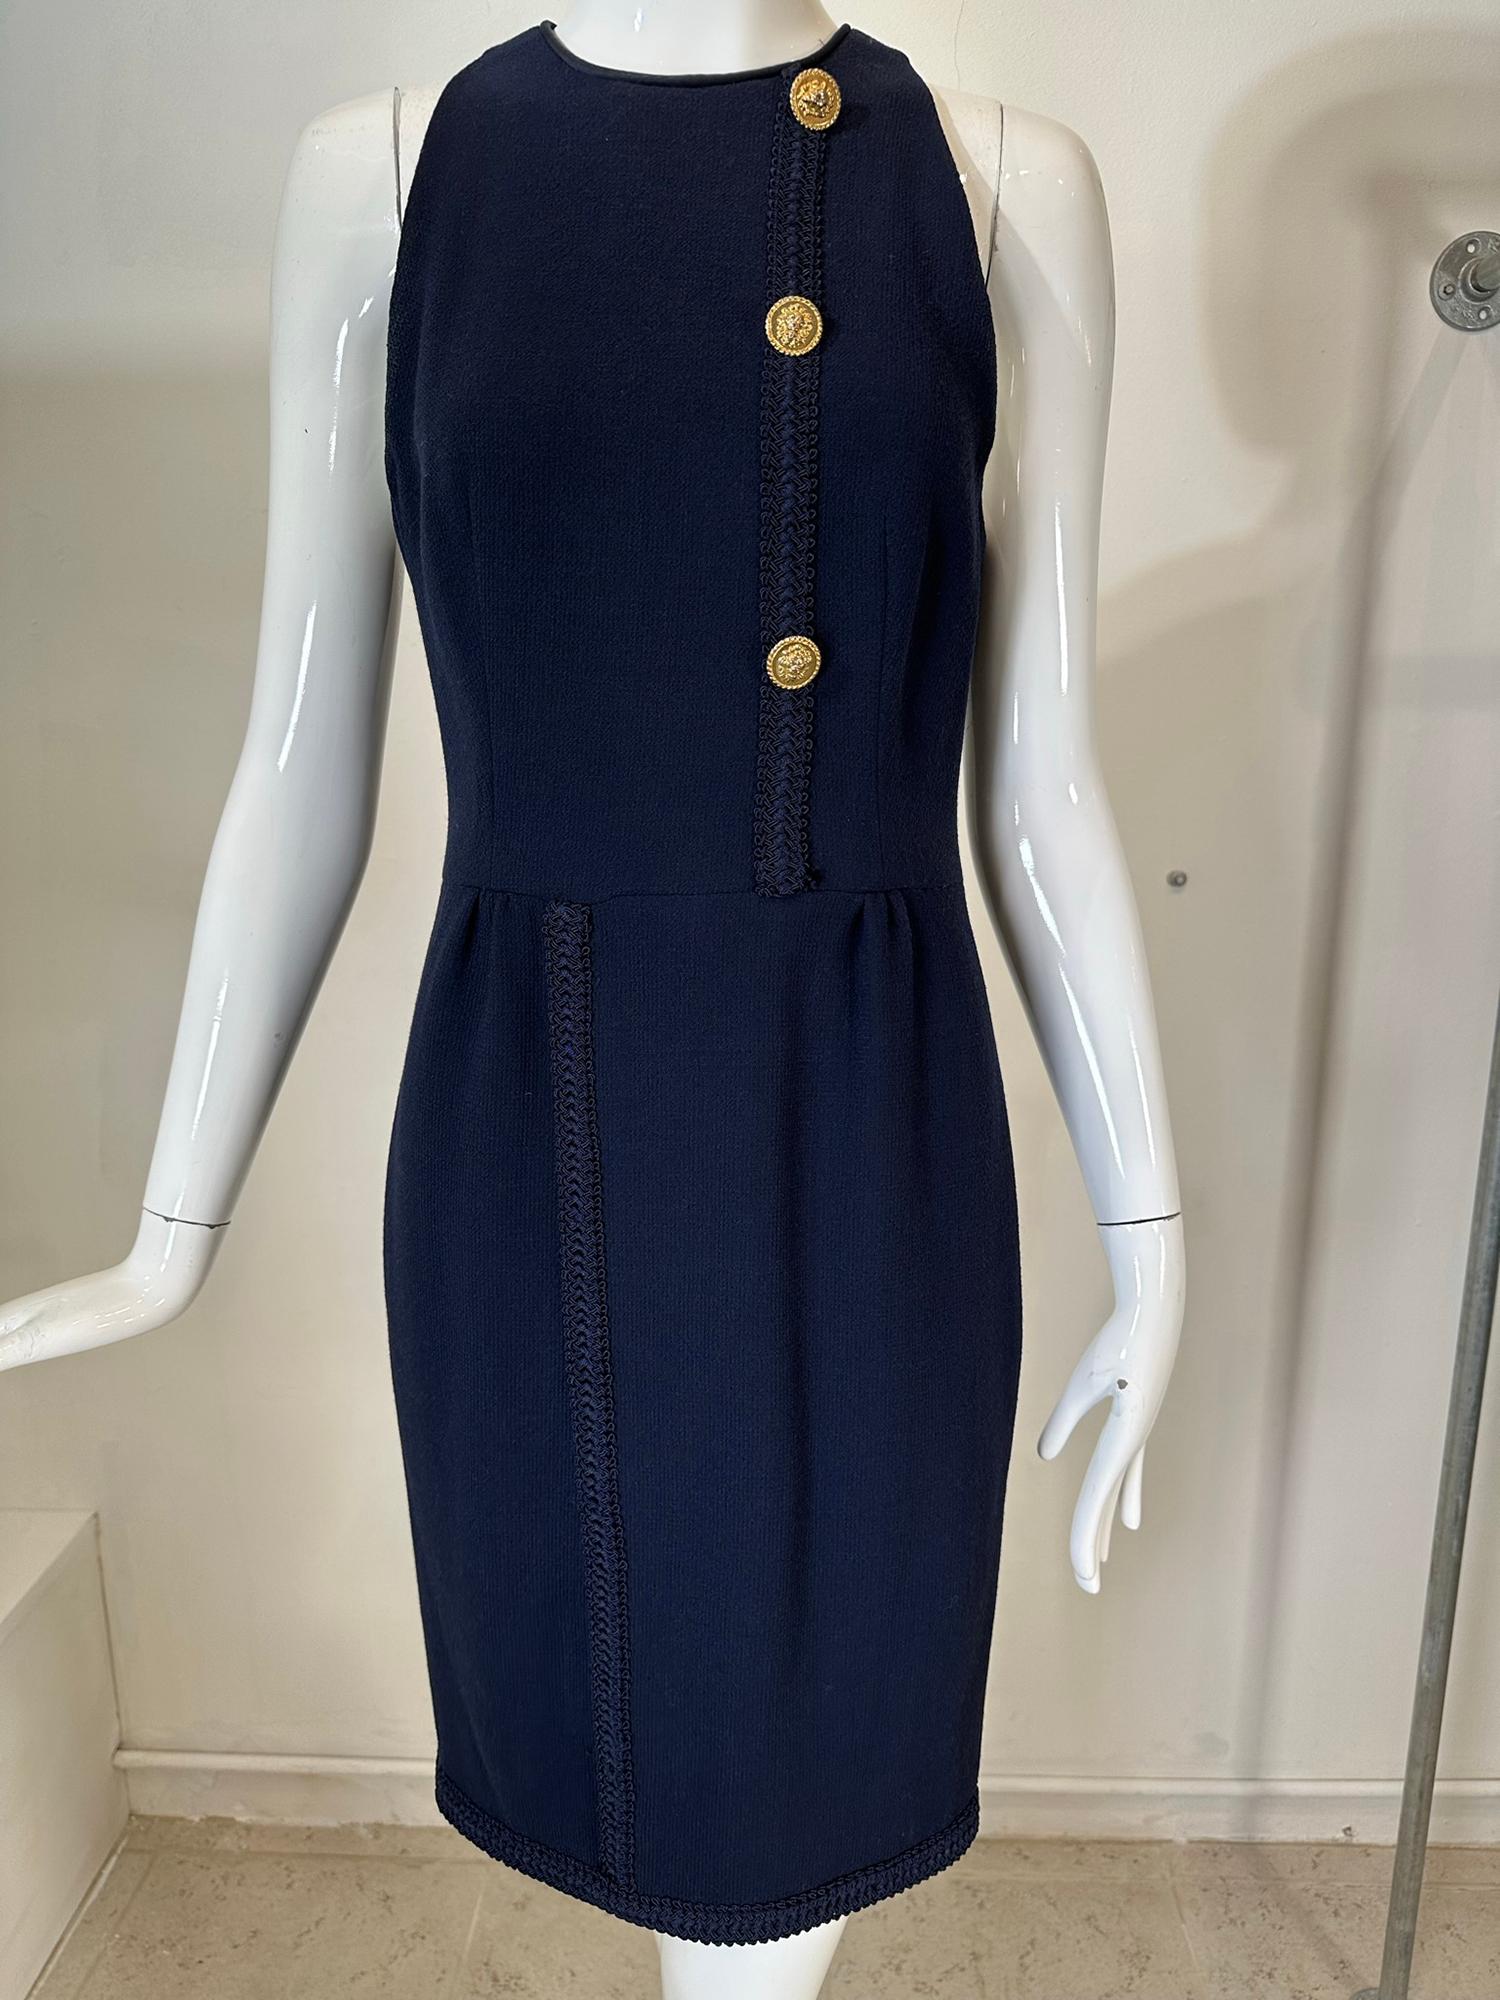 Irene Galitzine Couture Navy Blue Racer Neck Fitted Sheath Braid Trim Dress 1960 For Sale 4